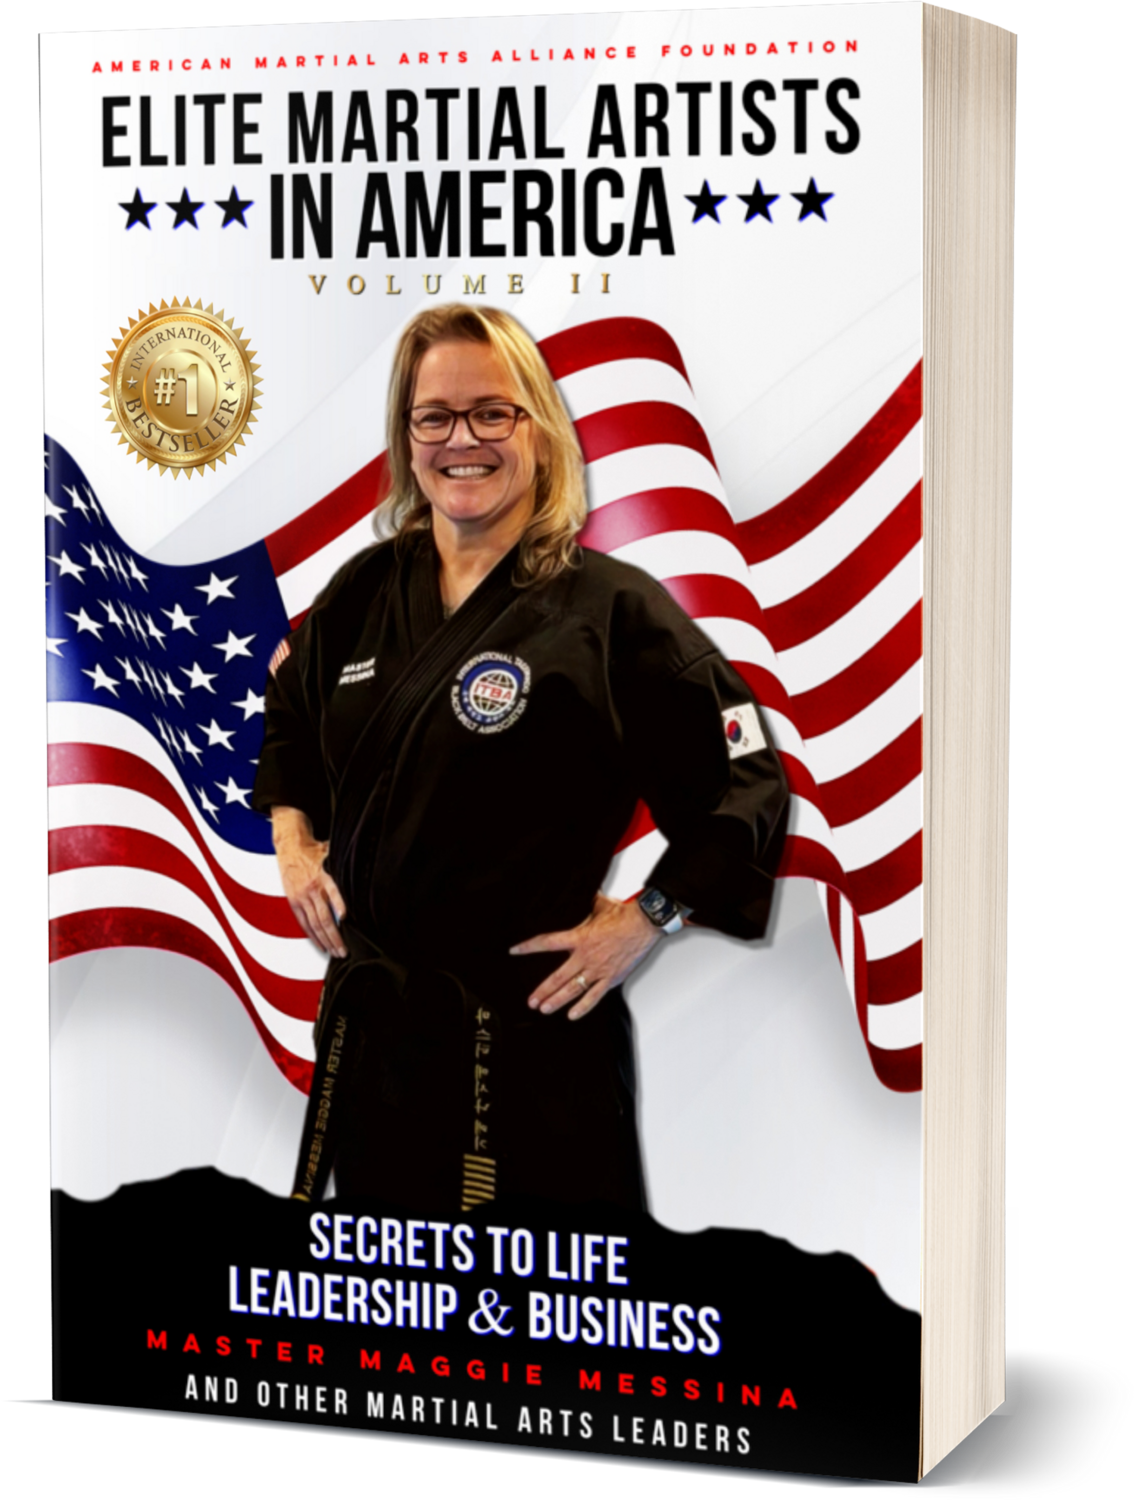 ELITE MARTIAL ARTISTS IN AMERICA: SECRETS TO LIFE, LEADERSHIP, AND BUSINESS, VOLUME II